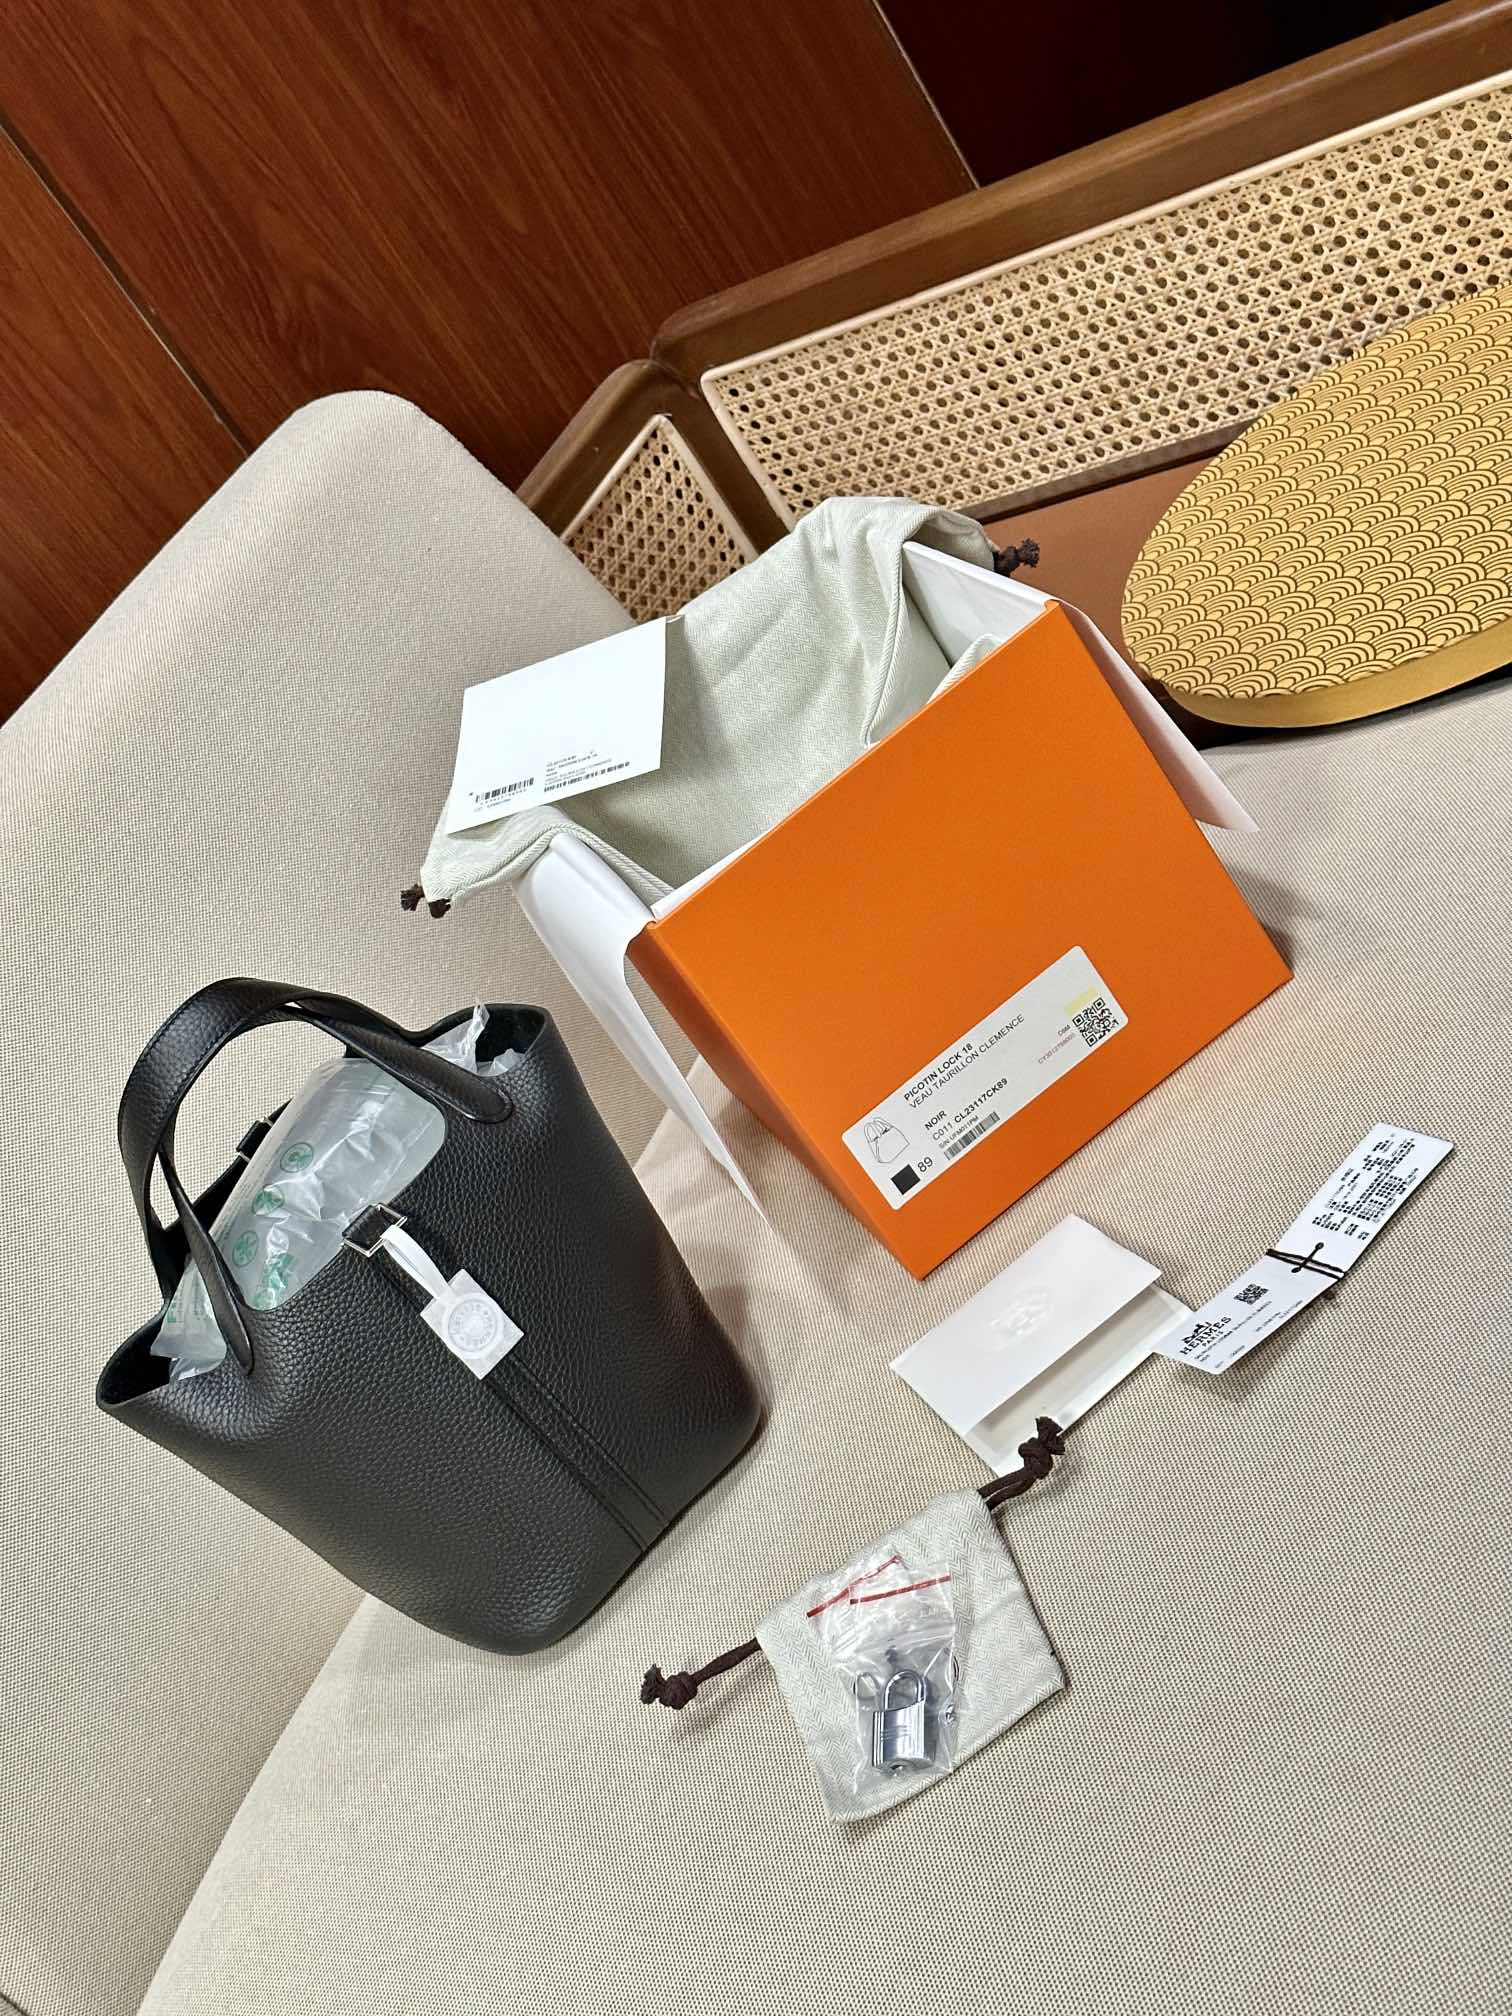 HERMES BLACK PHW Picotin 18 Taurillon Clemence. REAL 1:1 HAND-STITCHED!!!